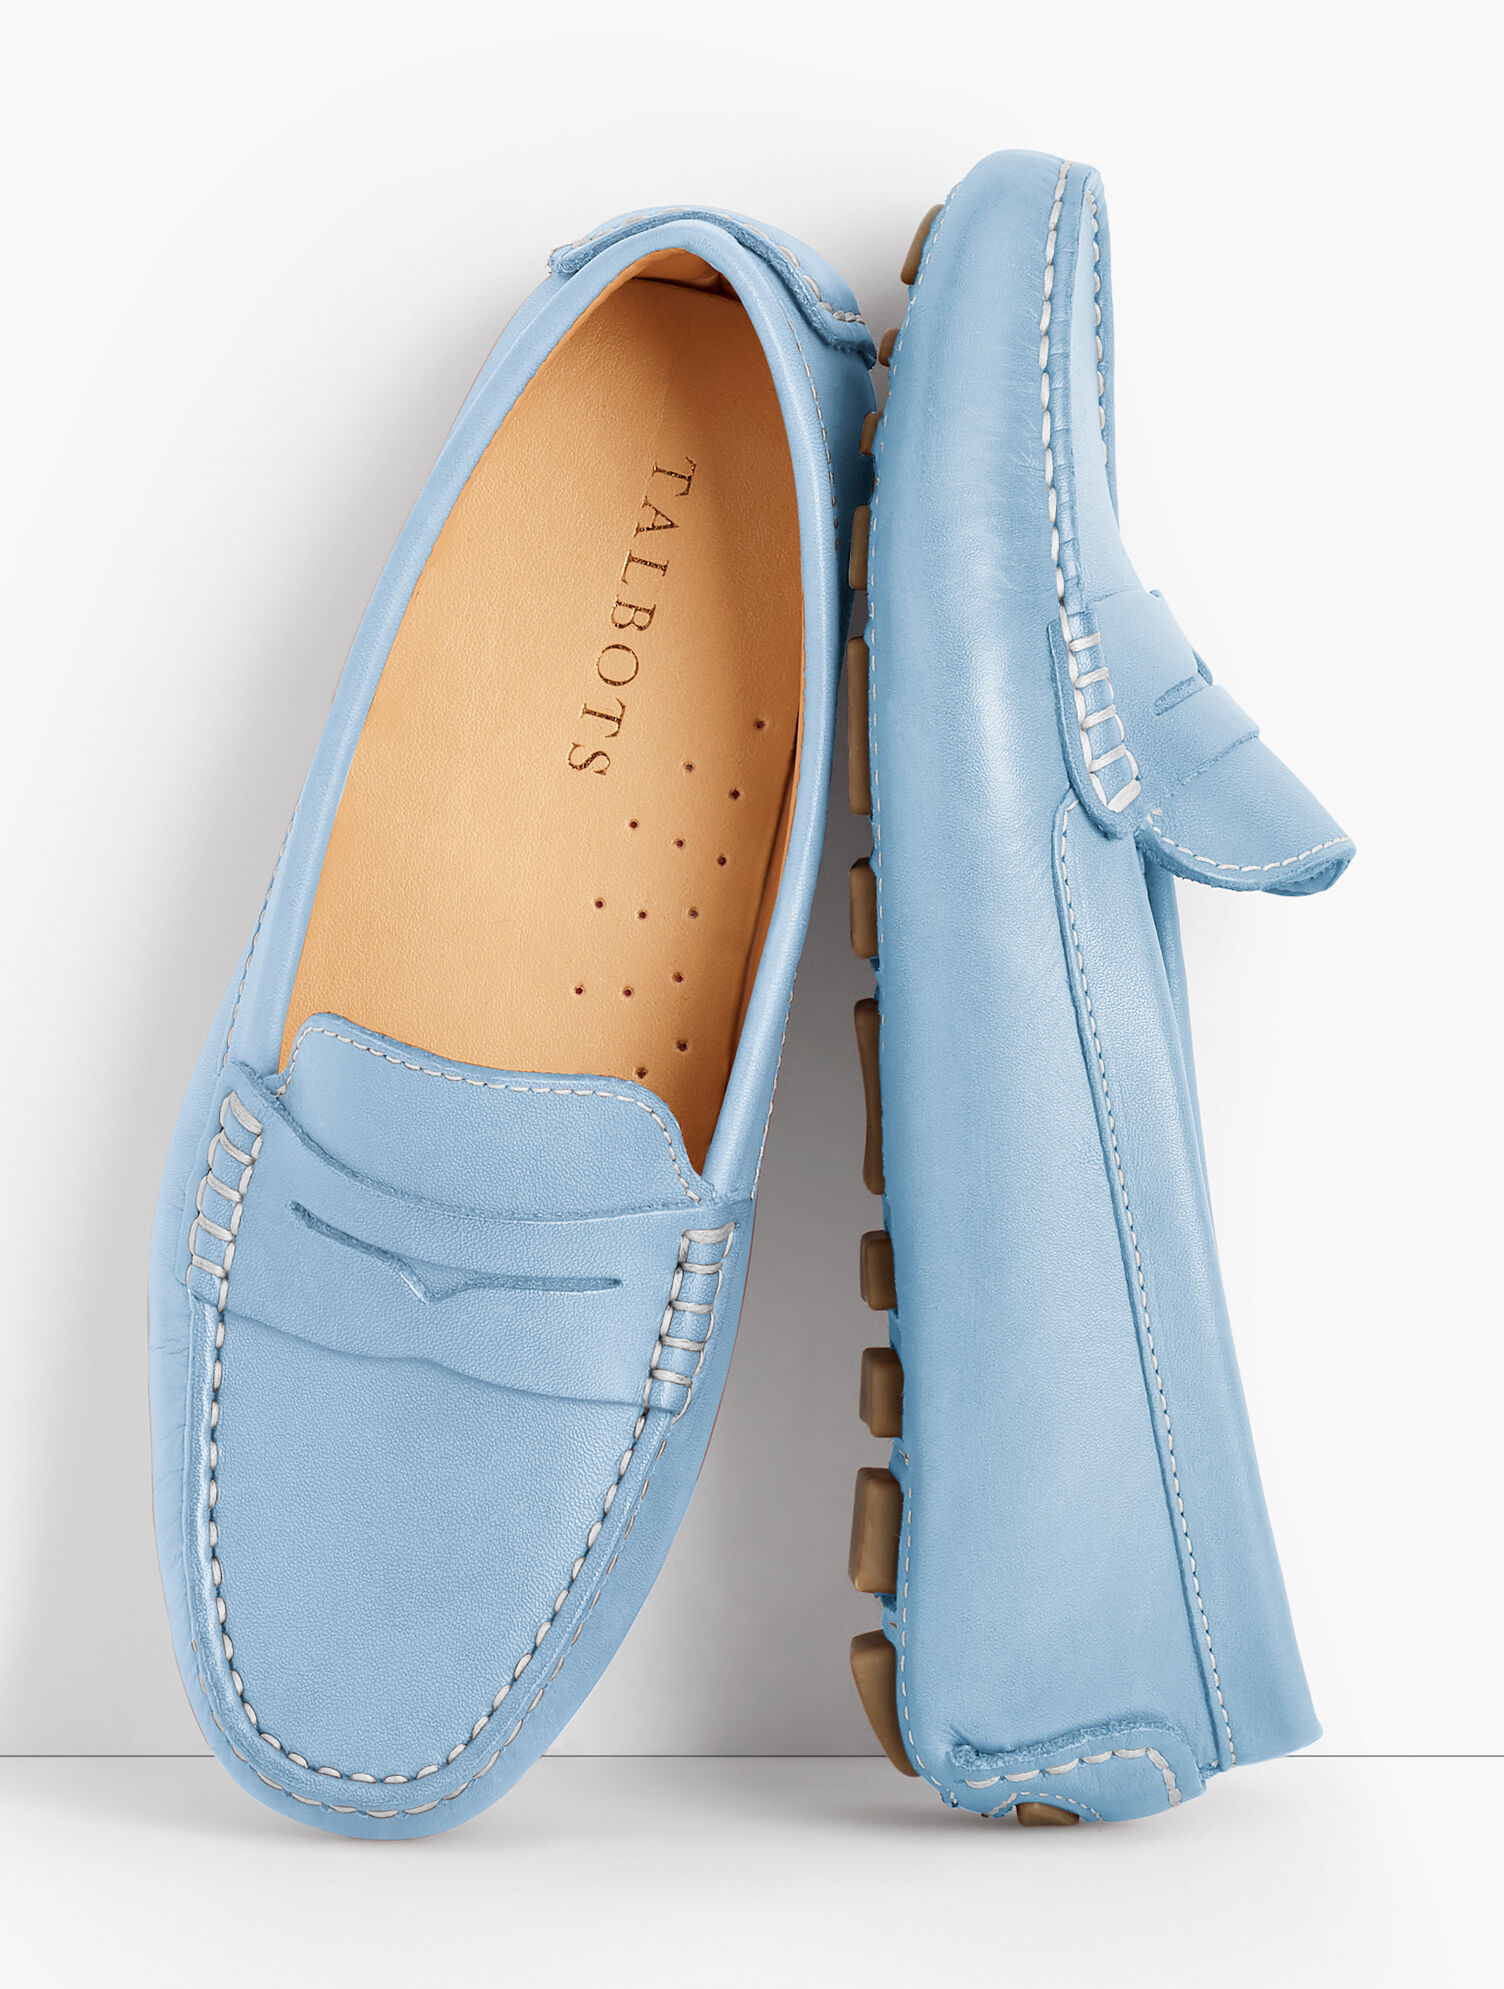 Talbots Laced Driving Moccasins/Shoes Taylor Wedgewood Blue